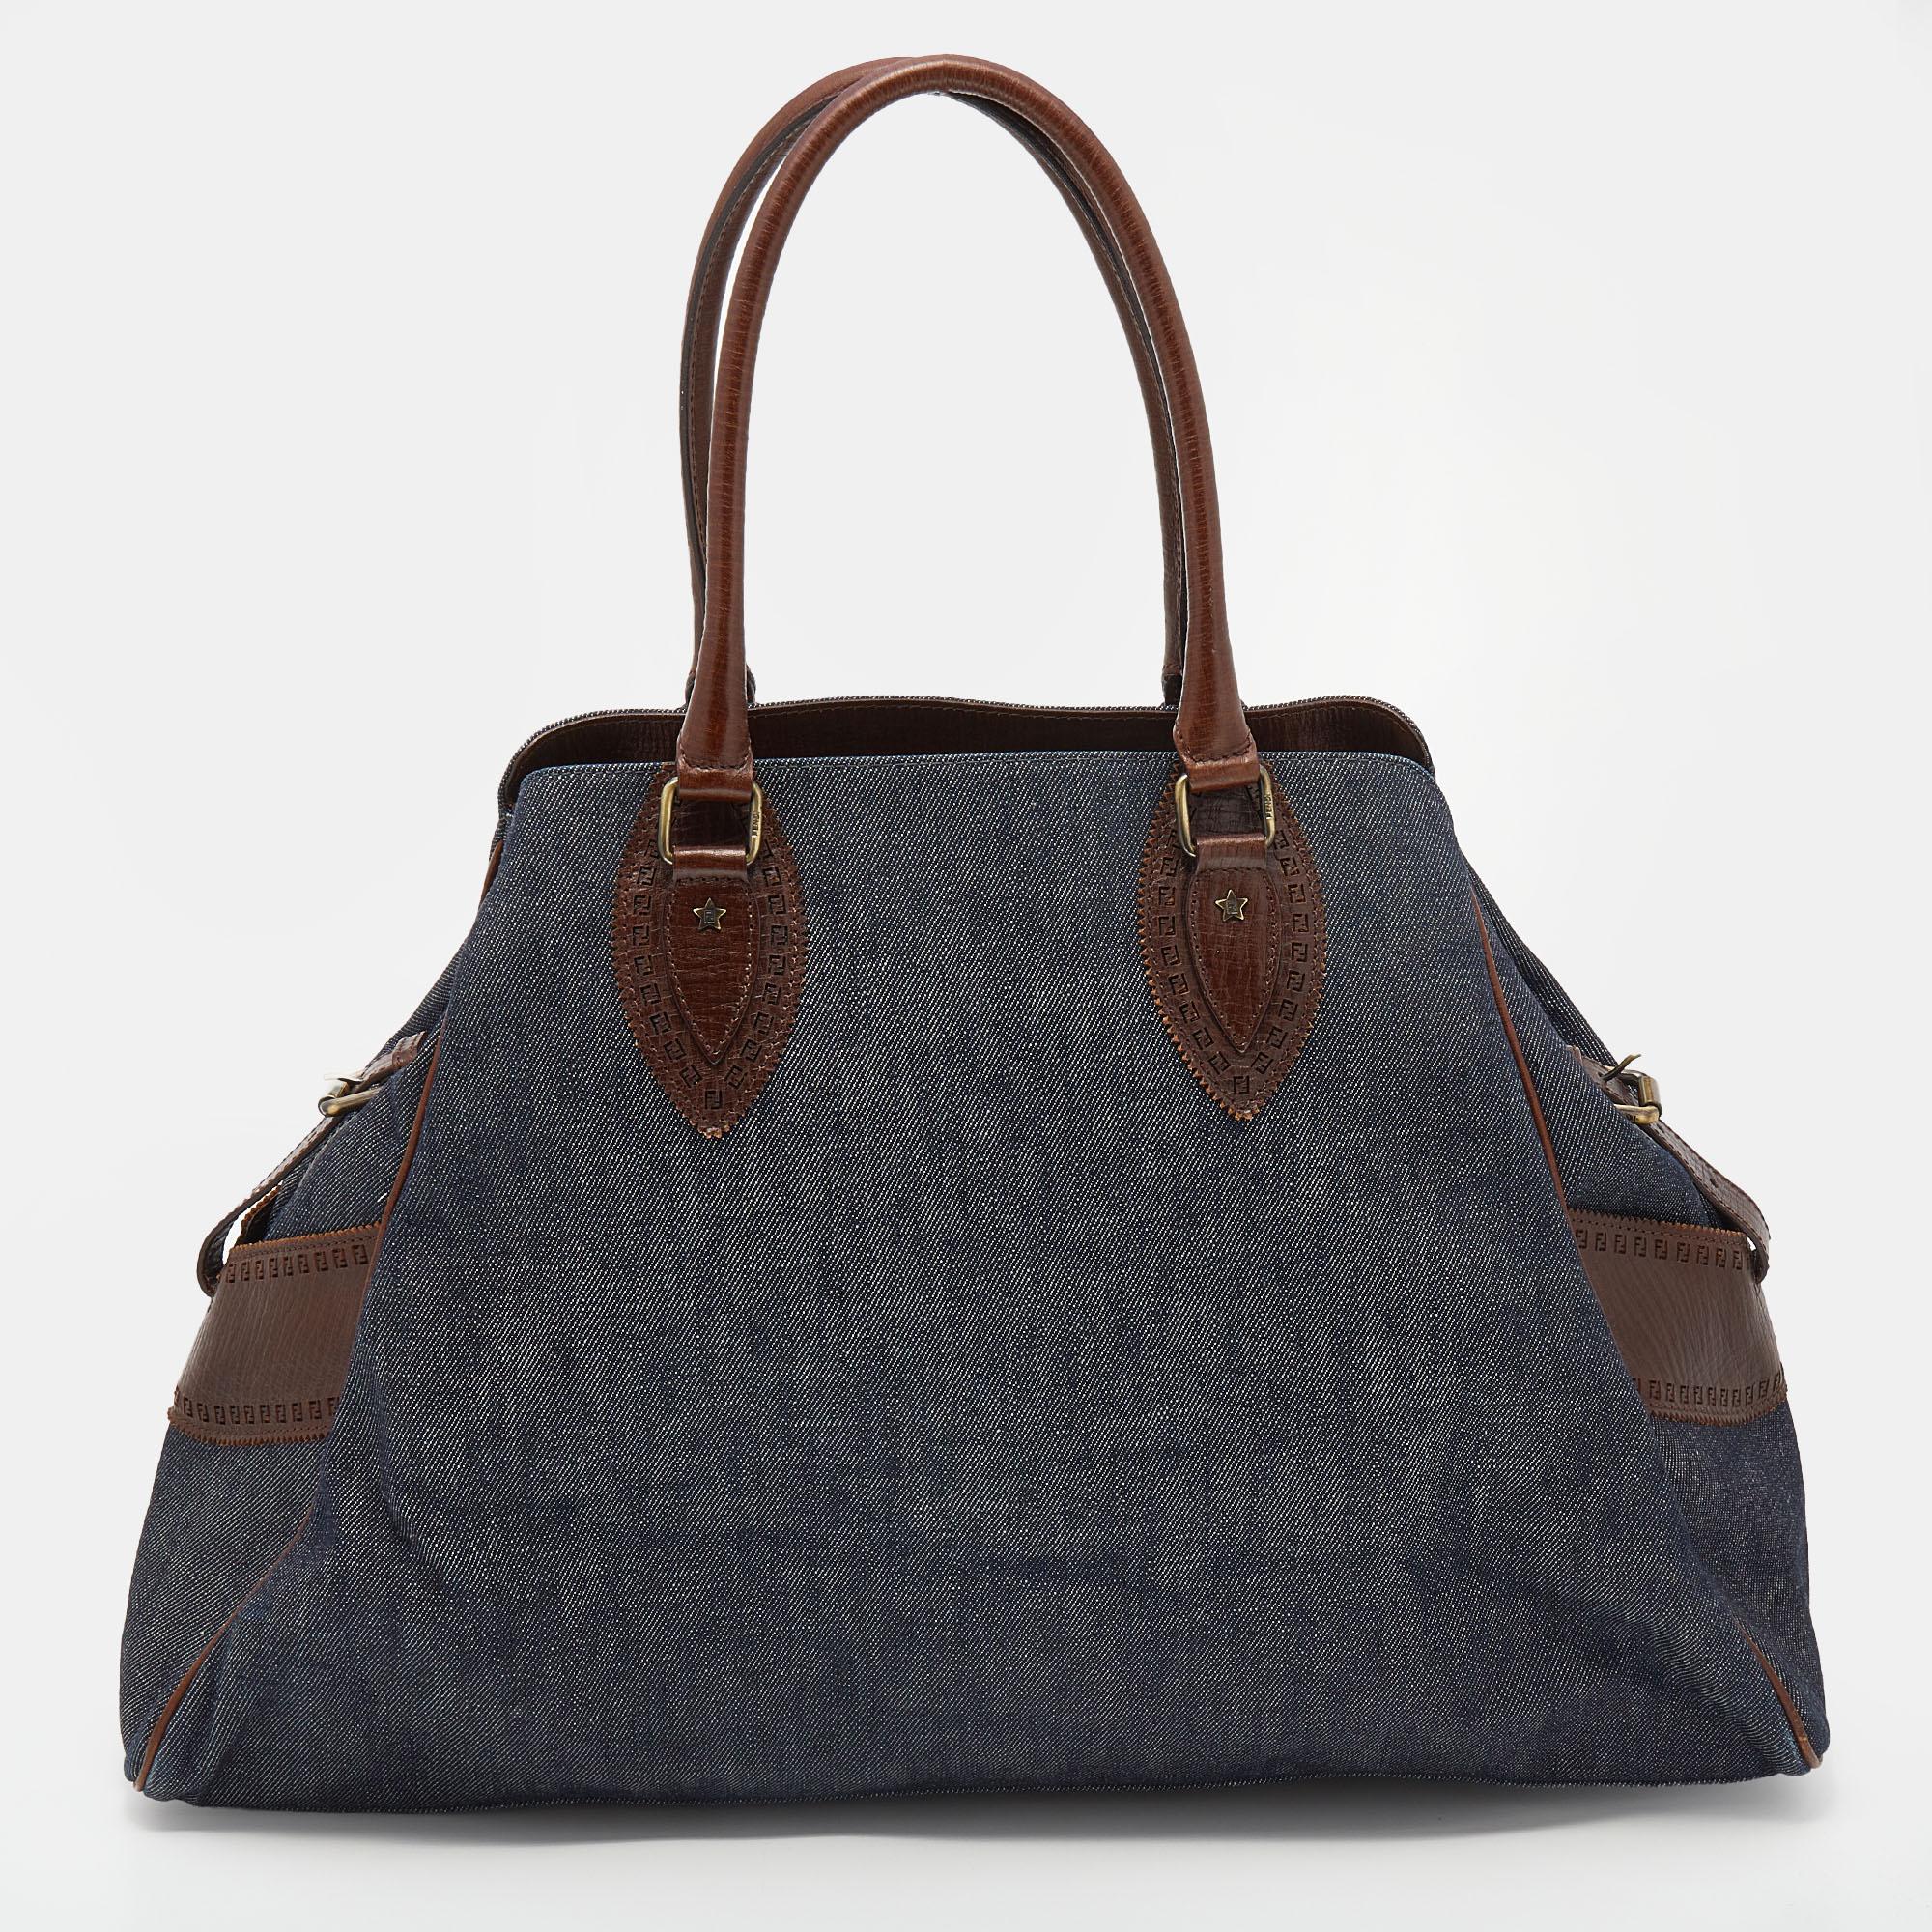 This gorgeous satchel from Fendi is crafted from denim and leather and is enhanced with brass-tone hardware. It comes with dual handles and shows a chic shape. The bag is lined with satin on the inside and will easily hold your necessities with